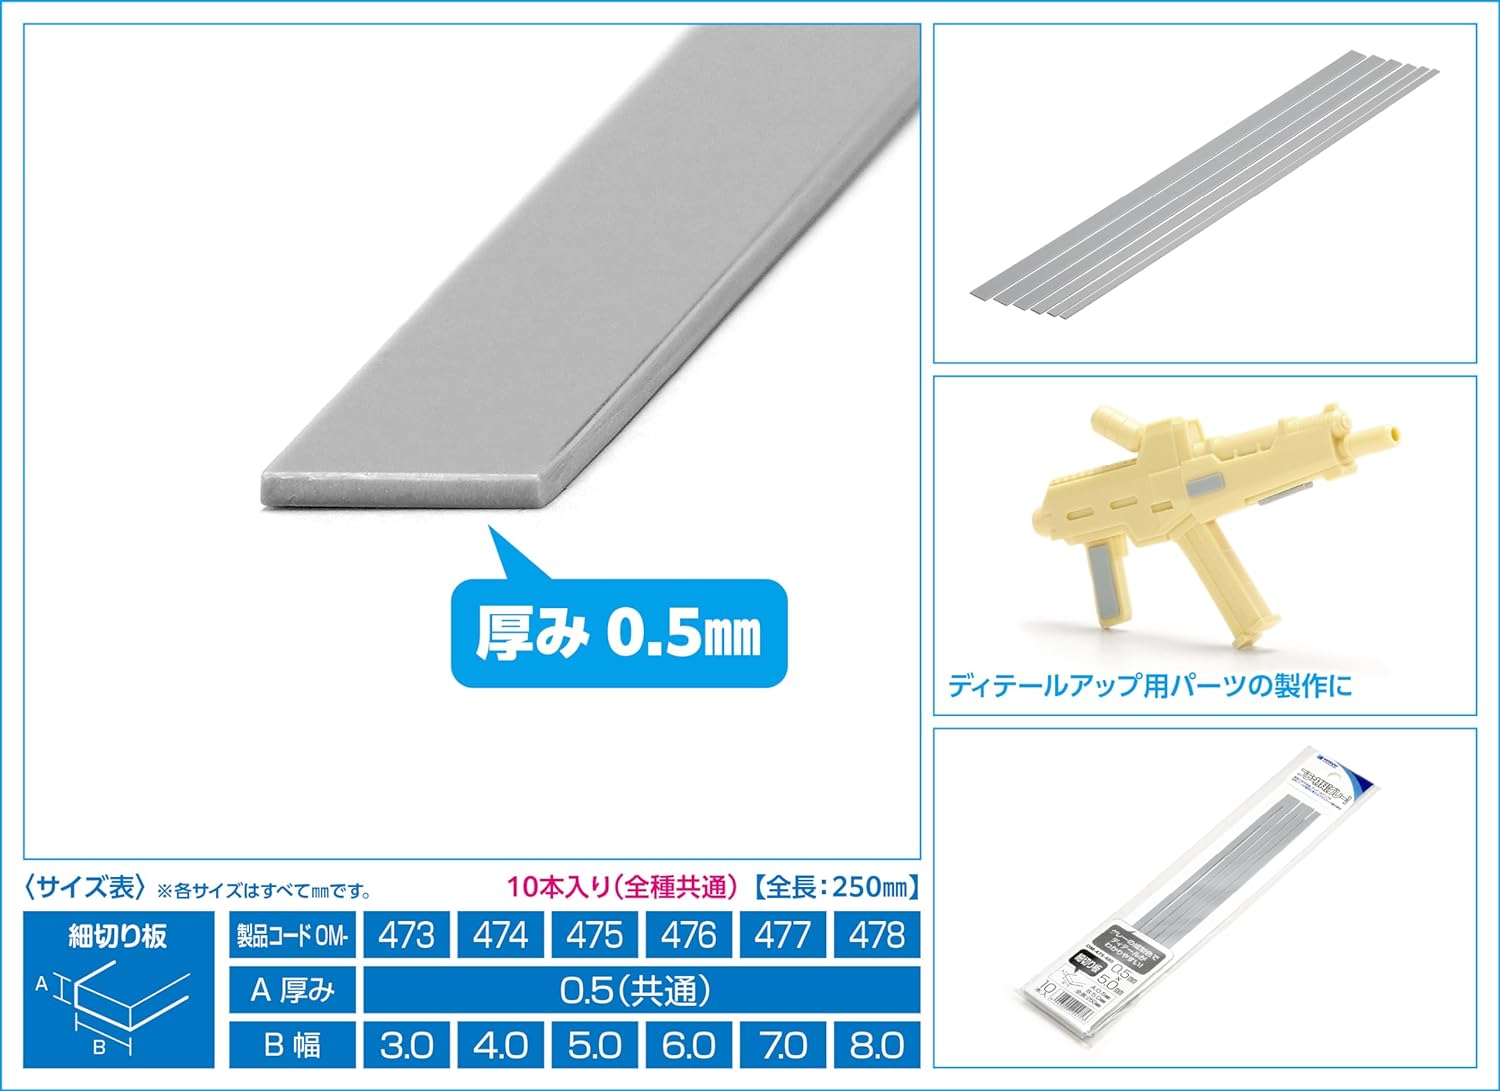 Wave Material Series OM-478 Plastic Material, Gray, Shredded Board, 0.02 x 0.31 inches (0.5 x 8.0 mm), 10 Pieces - BanzaiHobby